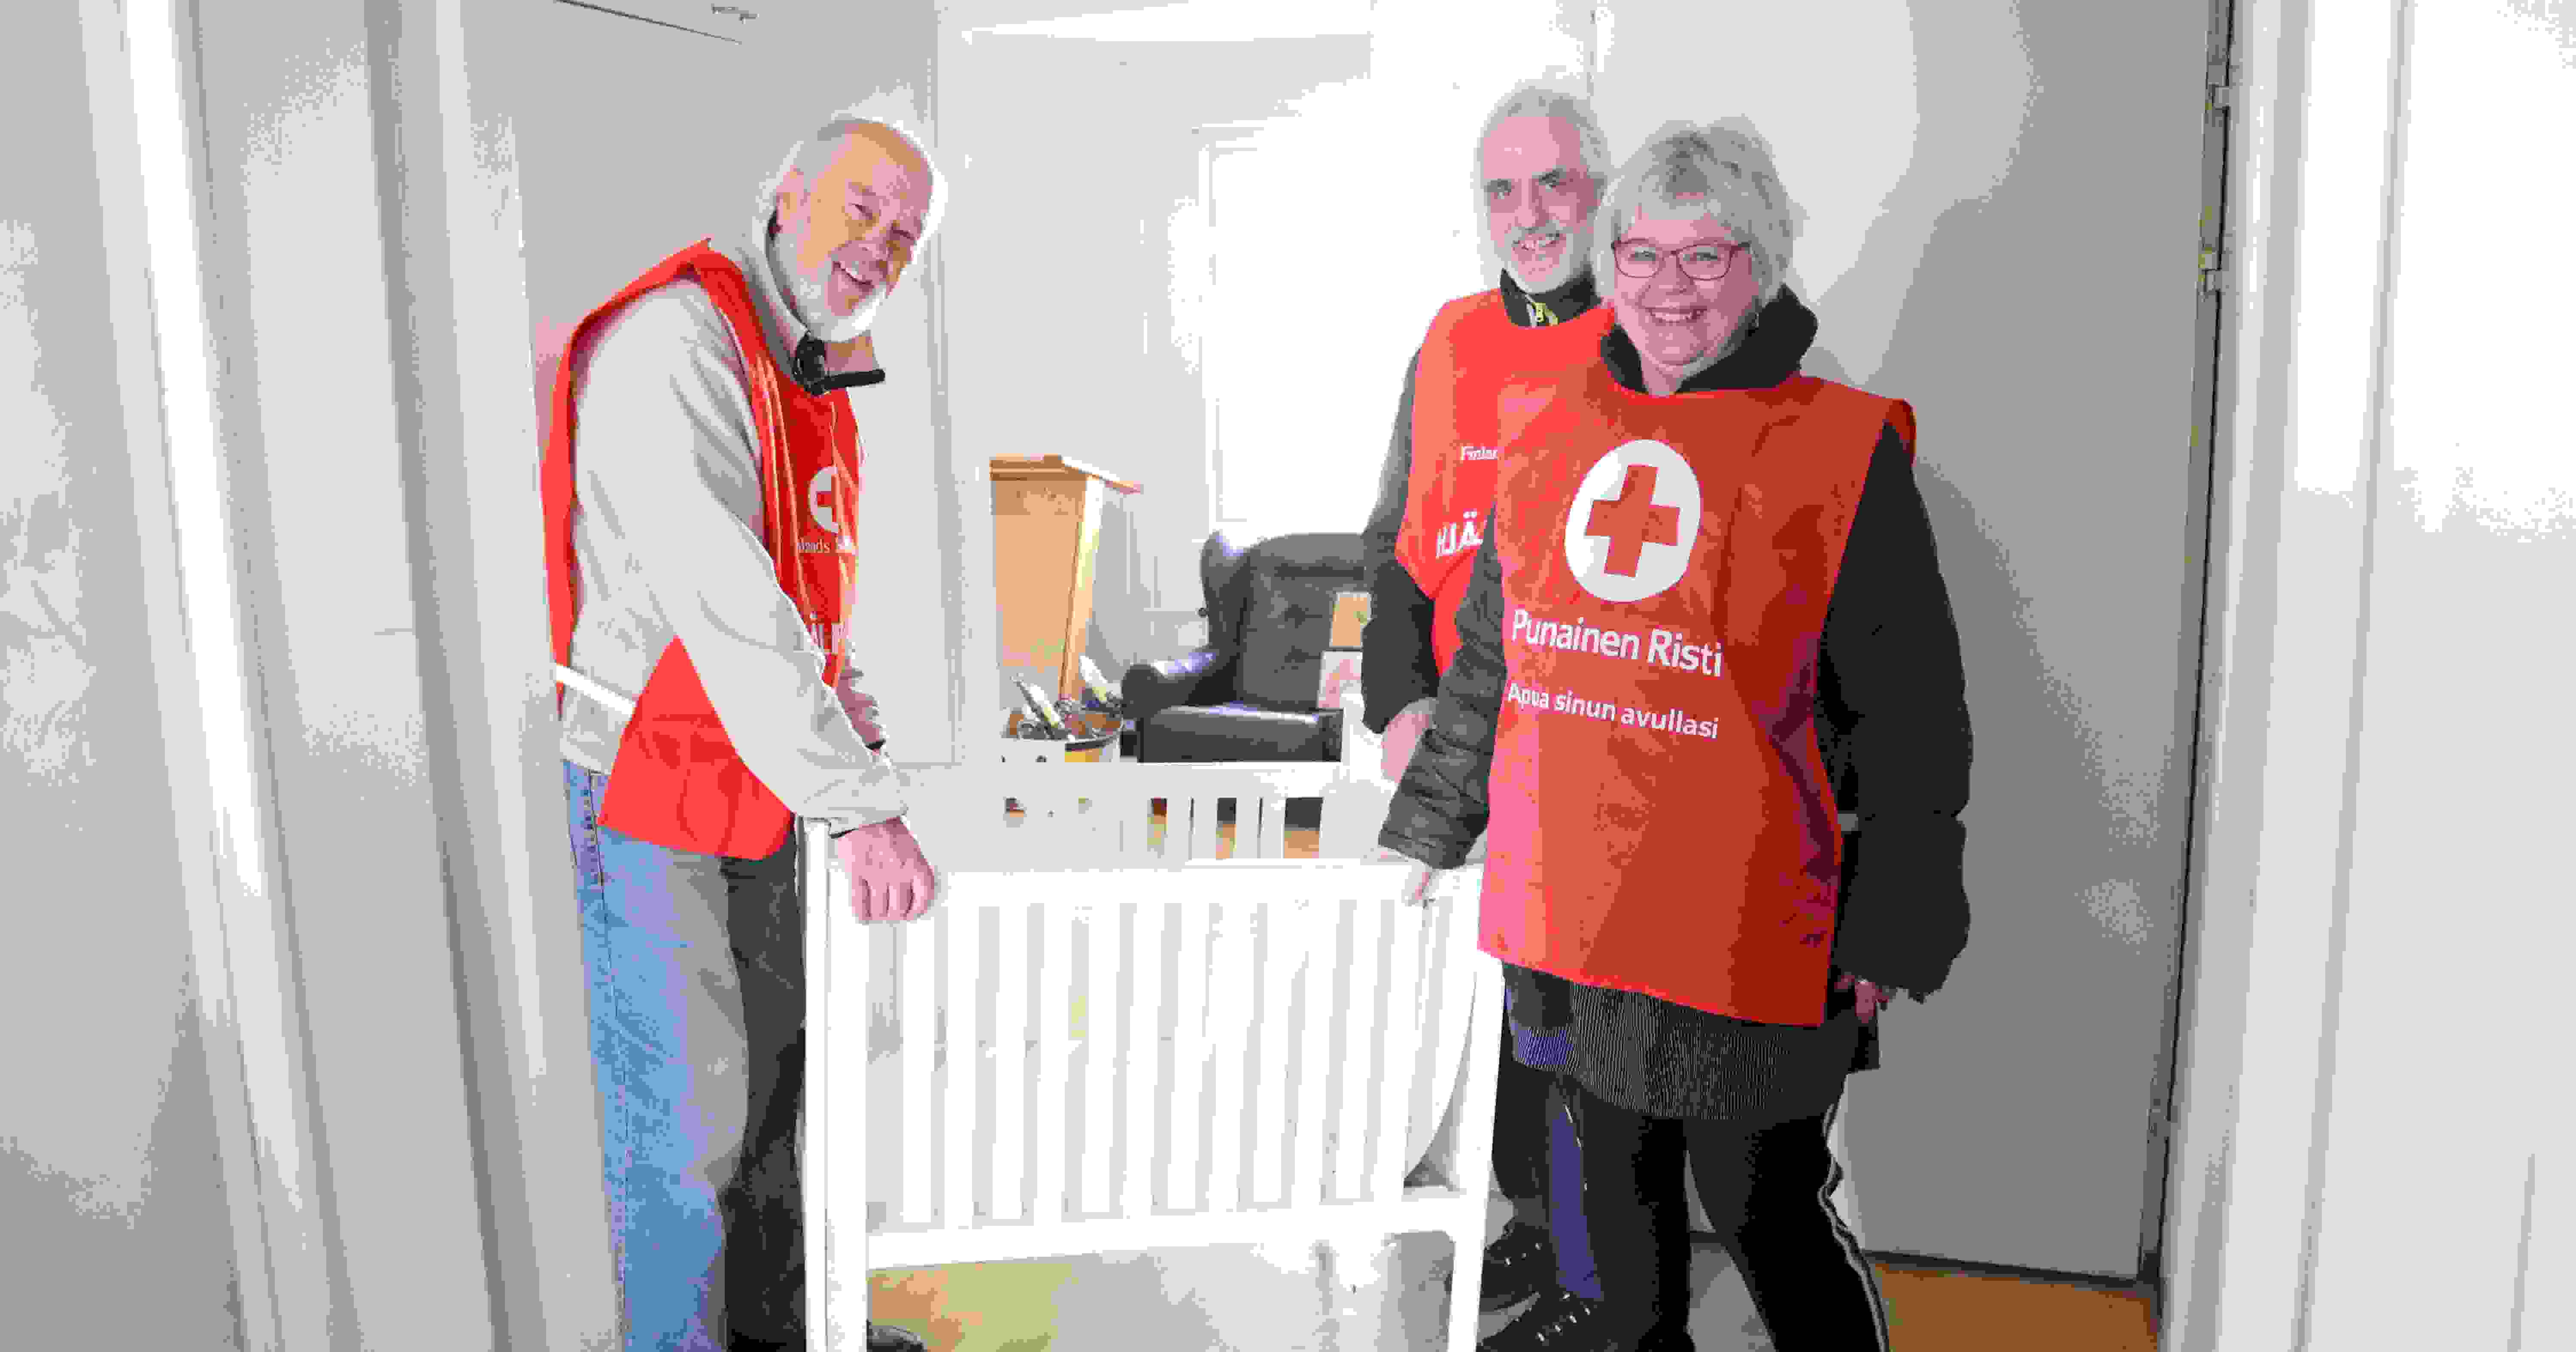 Three smiling people wearing Red Cross volunteer vests stand next to an infant bed in a dwelling that they have furnished for refugees.